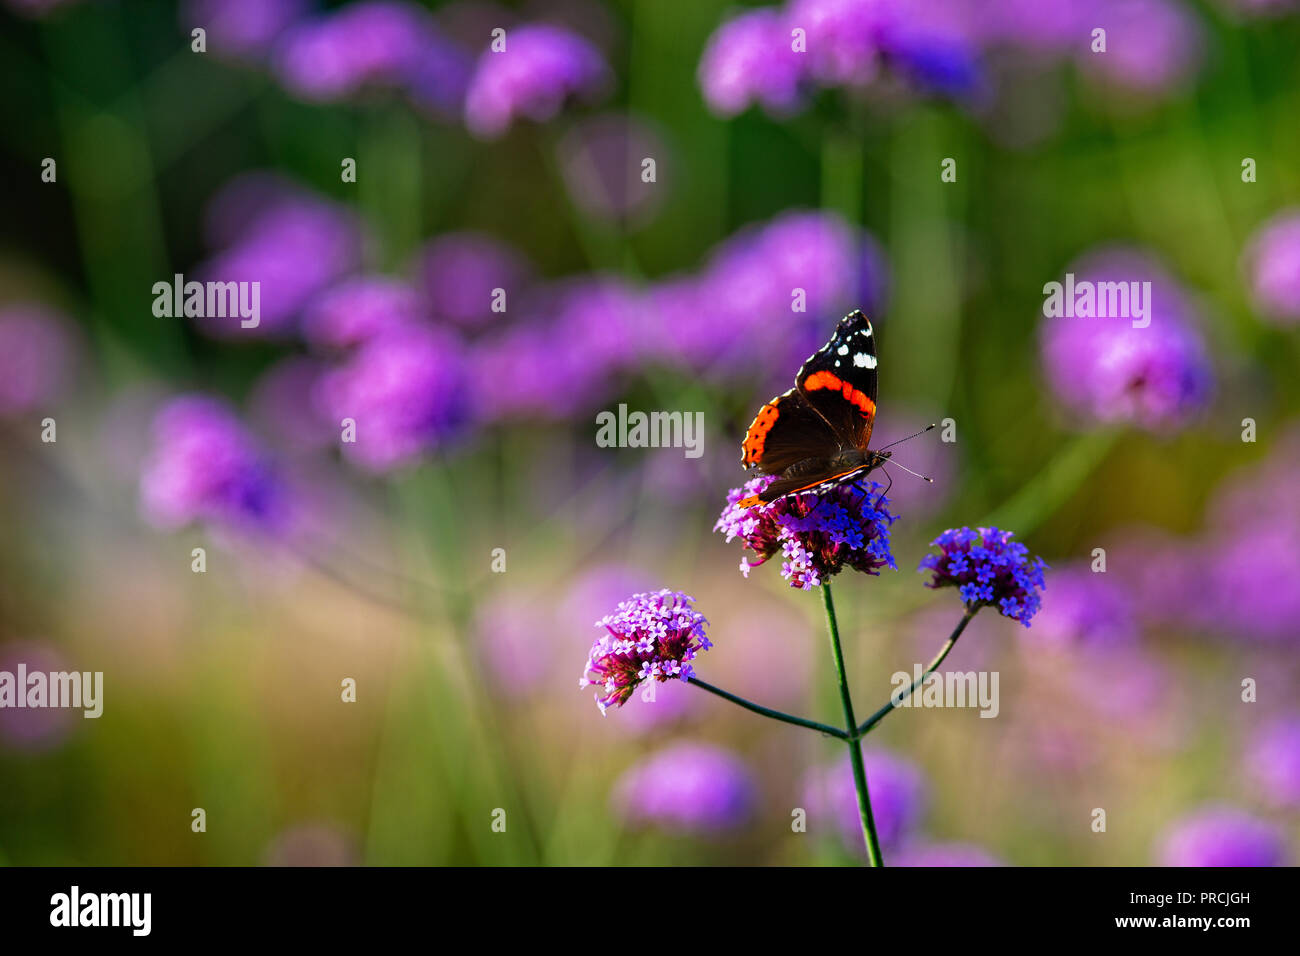 Painted lady butterfly on a violet verbena flower on a warm summer day. Blurry background, free space to enter text Stock Photo